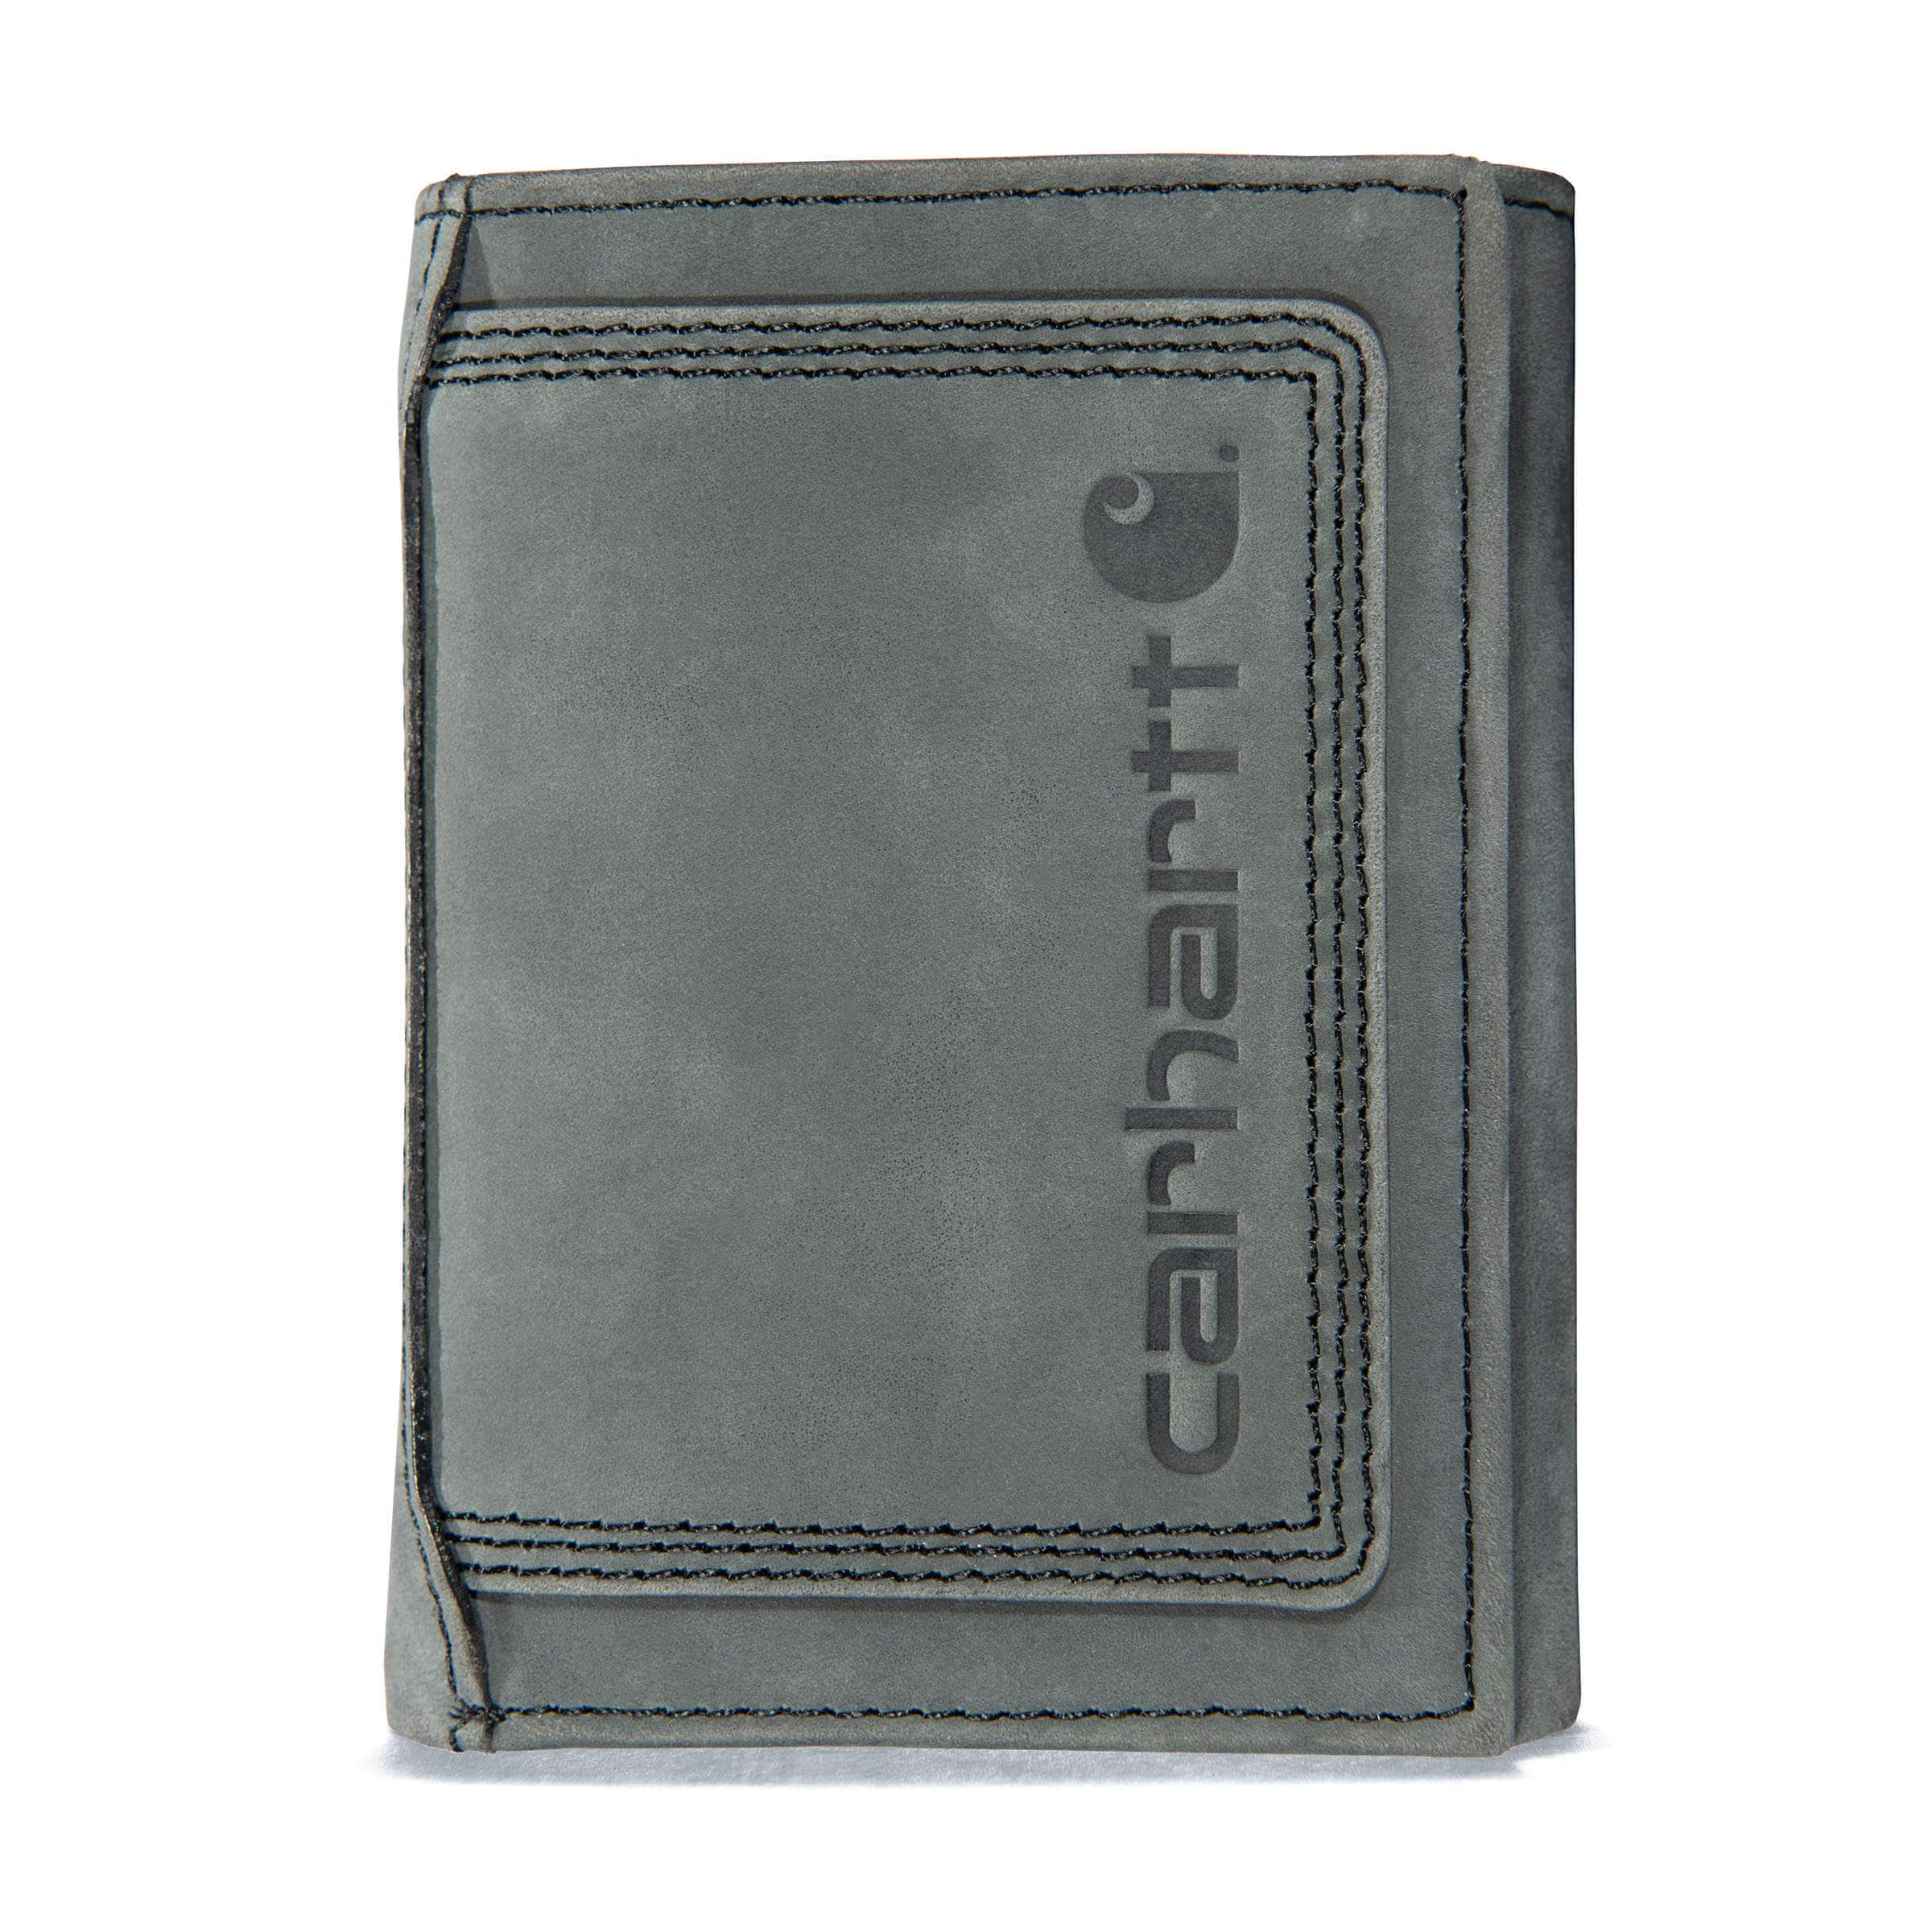  Carhartt mens Front Pocket Wallets, Durable Canvas Or Leather  With Money Clip, Nylon Duck (Black), One Size US : Clothing, Shoes & Jewelry